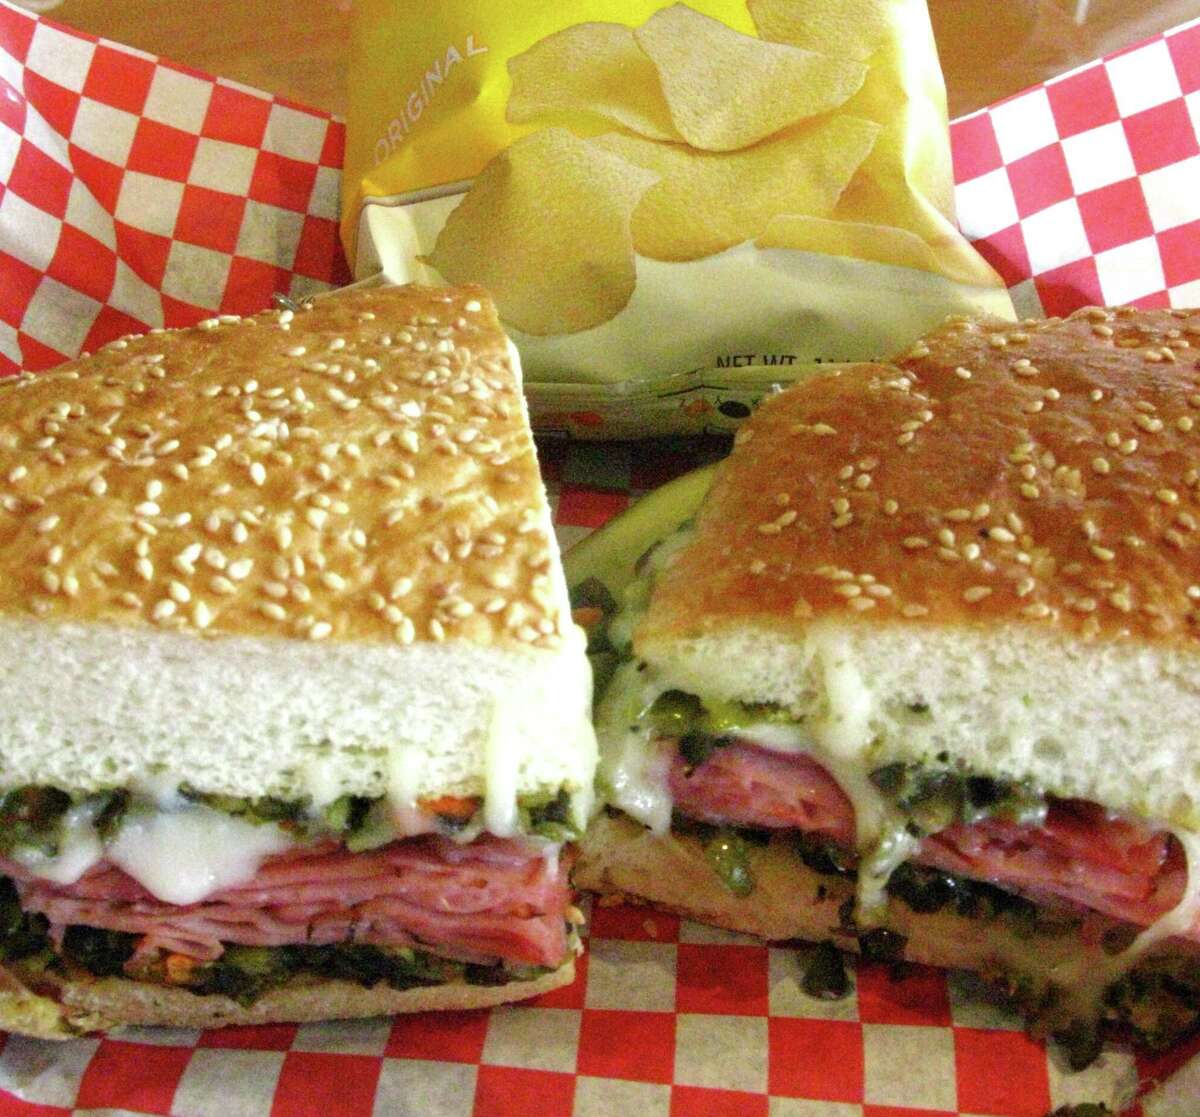 The Hearthstone Lotta Muffaletta from Hearthstone Bakery Cafe is stacked with your choice of ham and salami or turkey, layered with diced olives and veggies, provolone cheese and toasted.